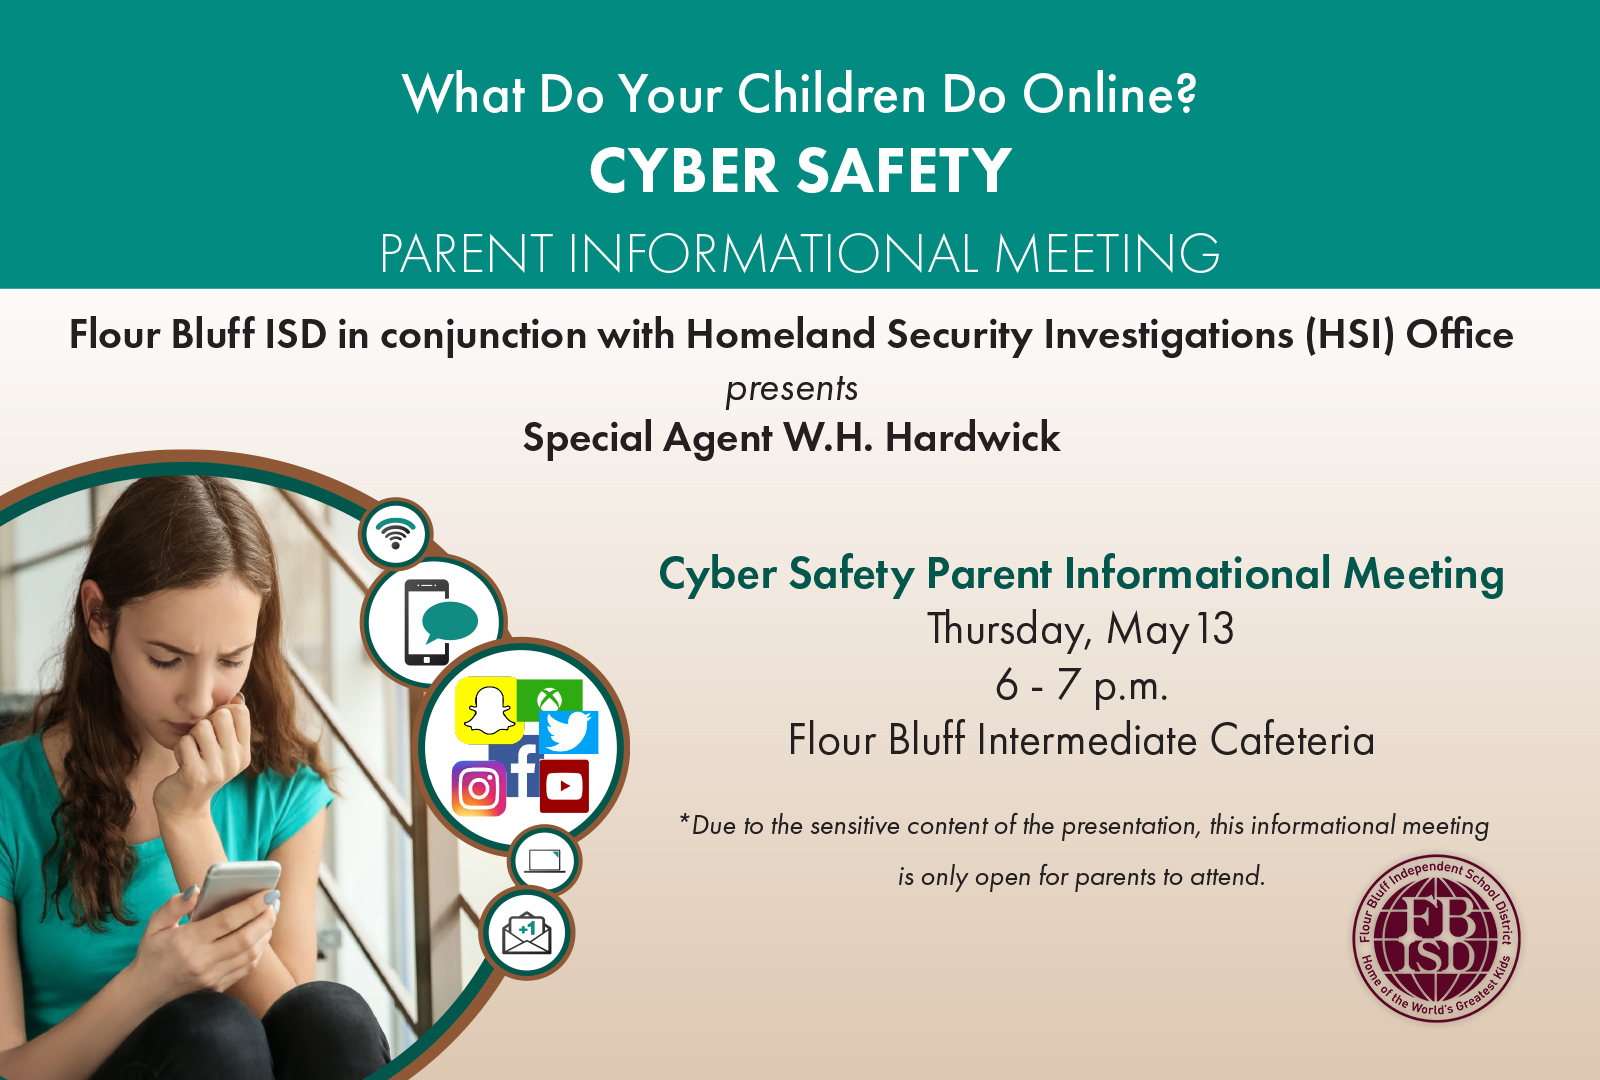 District hosting a Cyber Safety Parent Informational Meeting on May 13